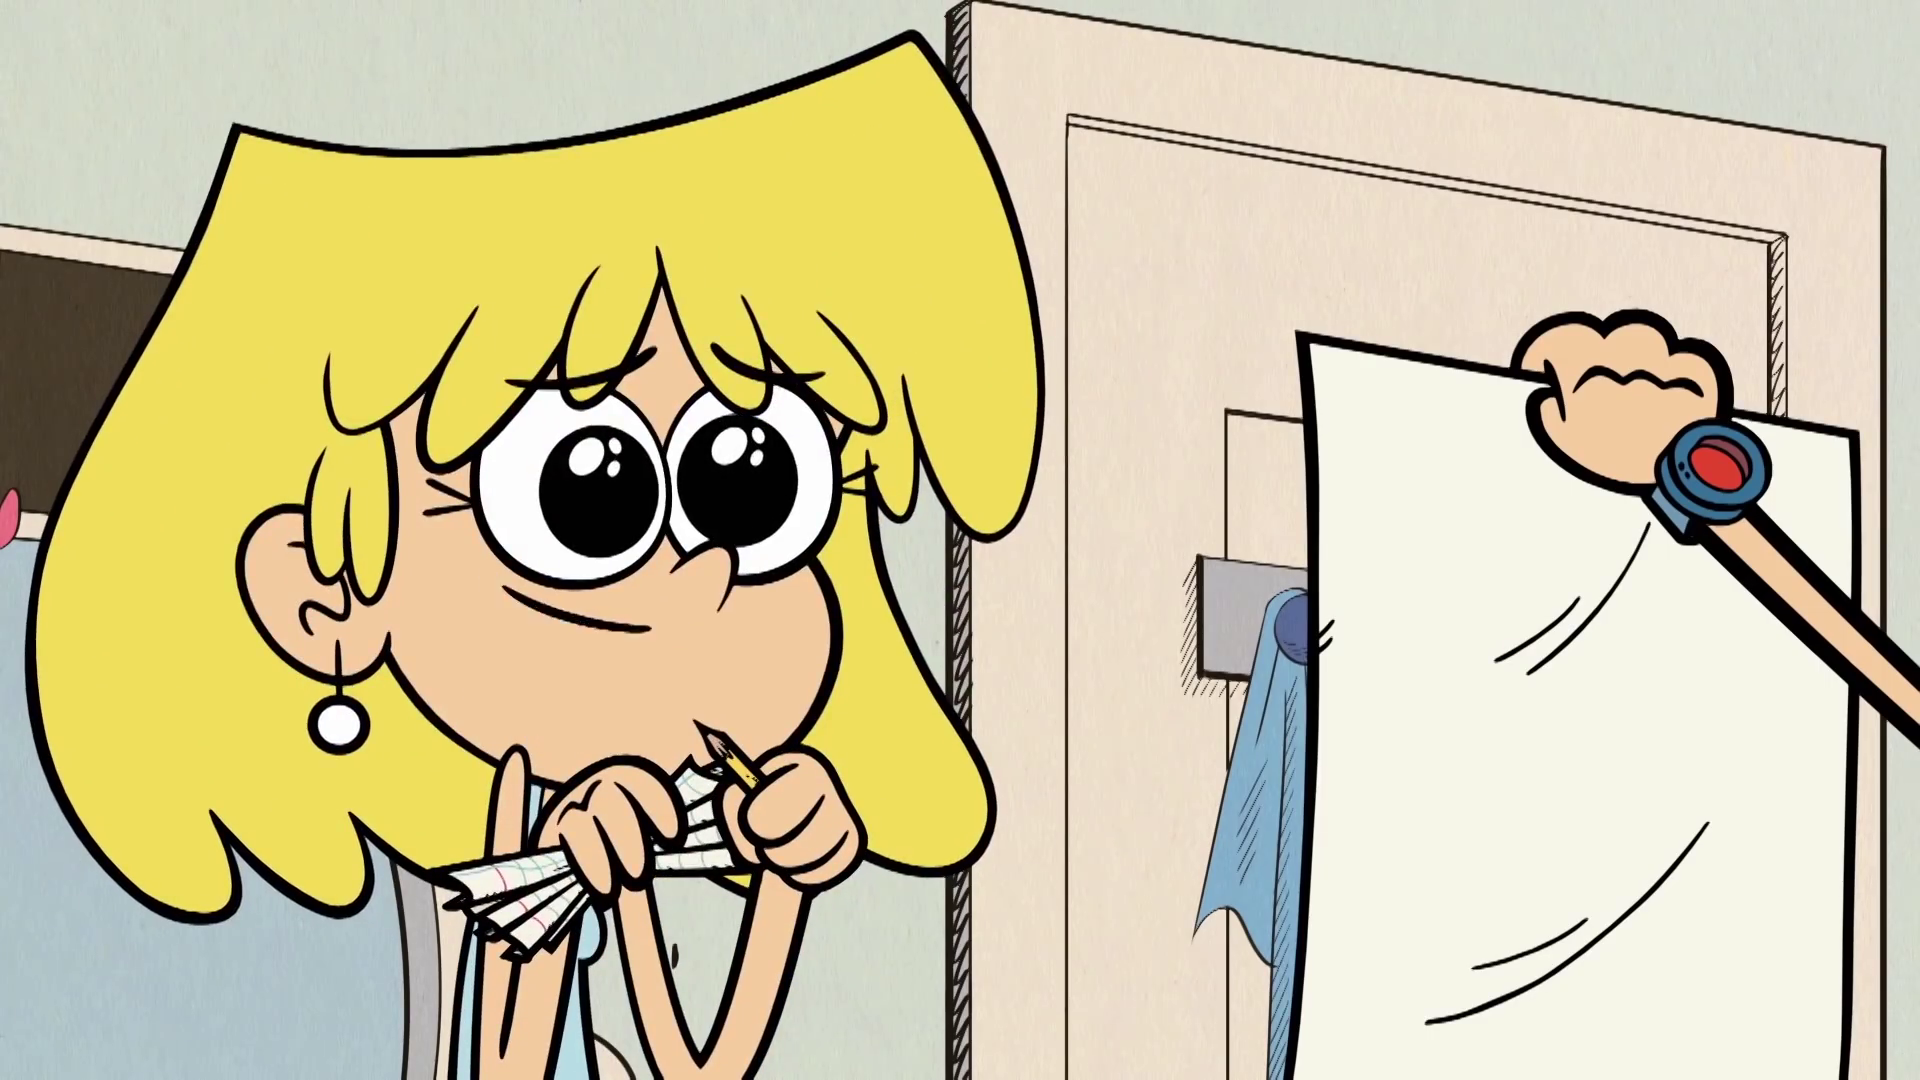 http://vignette1.wikia.nocookie.net/theloudhouse/images/f/fe/S1E11B_Aww...okay.png/revision/latest?cb=20160610010641